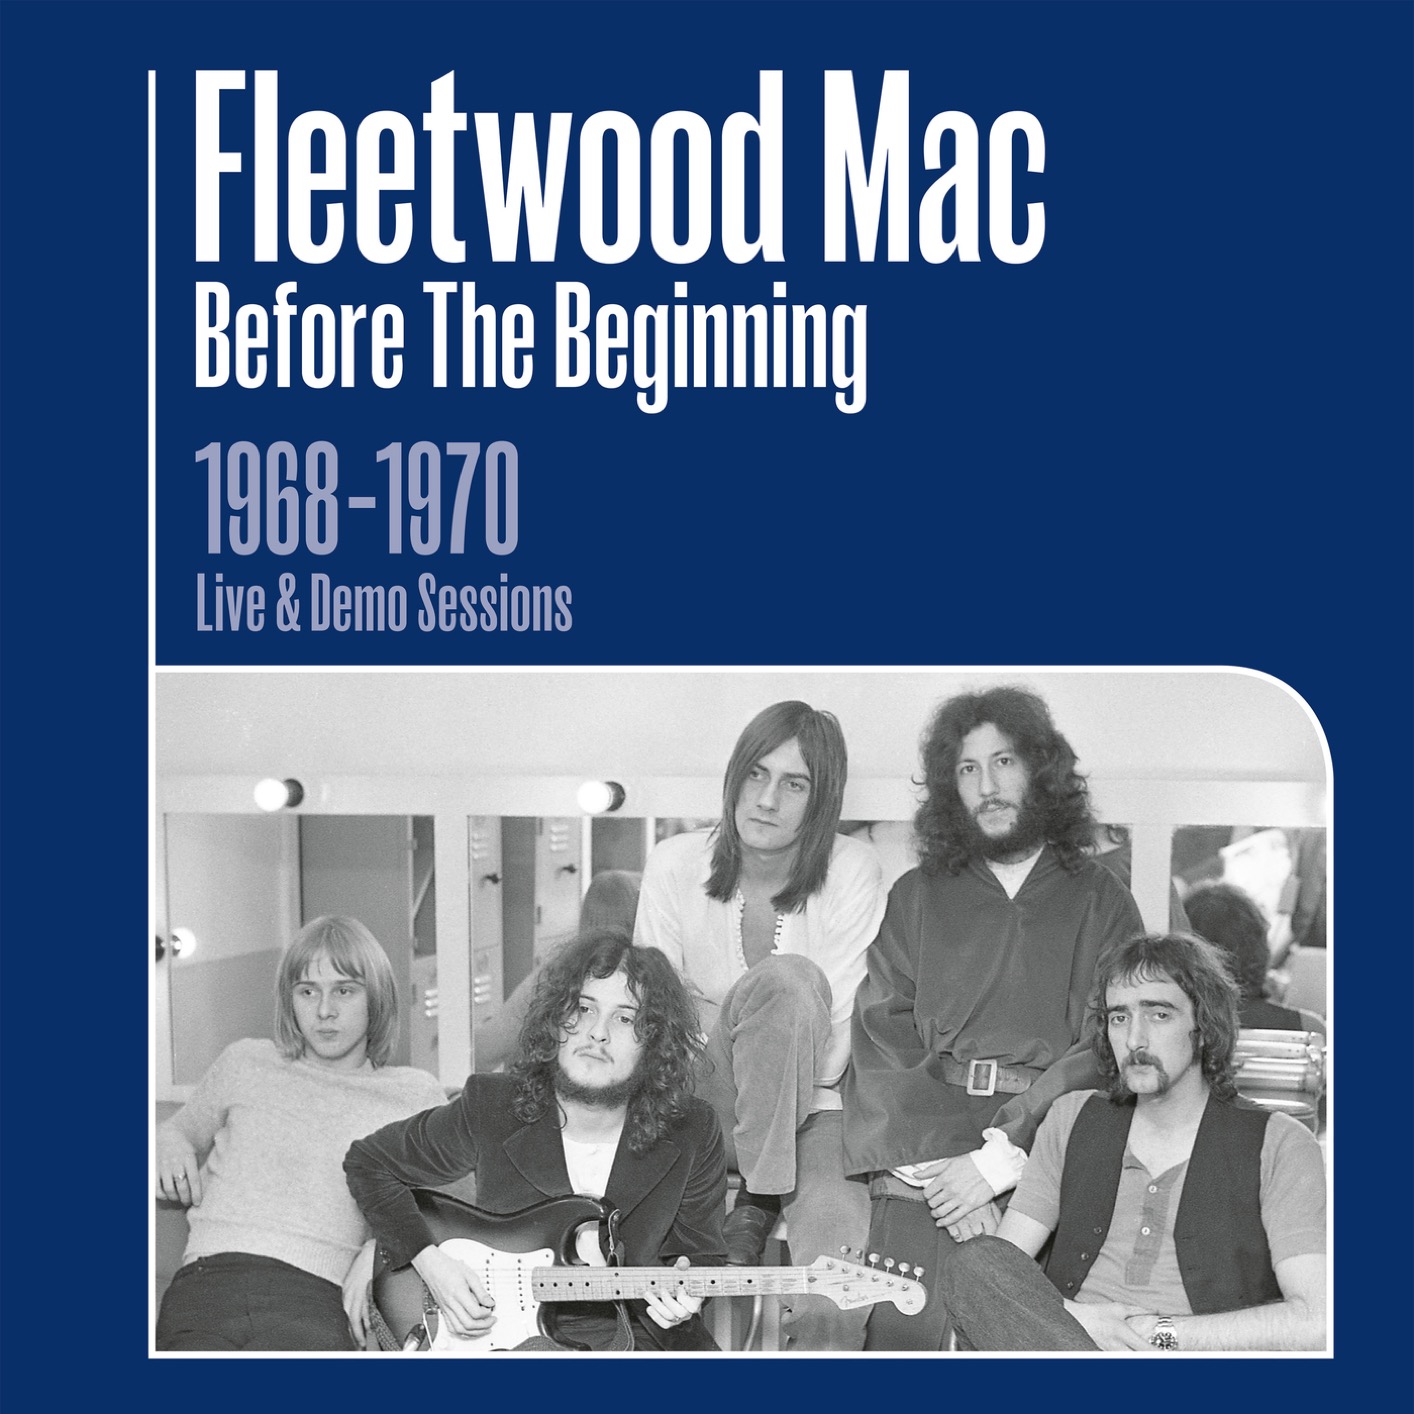 Fleetwood Mac - Before the Beginning: 1968-1970 Rare Live & Demo Sessions (Remastered) (2019) [FLAC 24bit/44,1kHz]